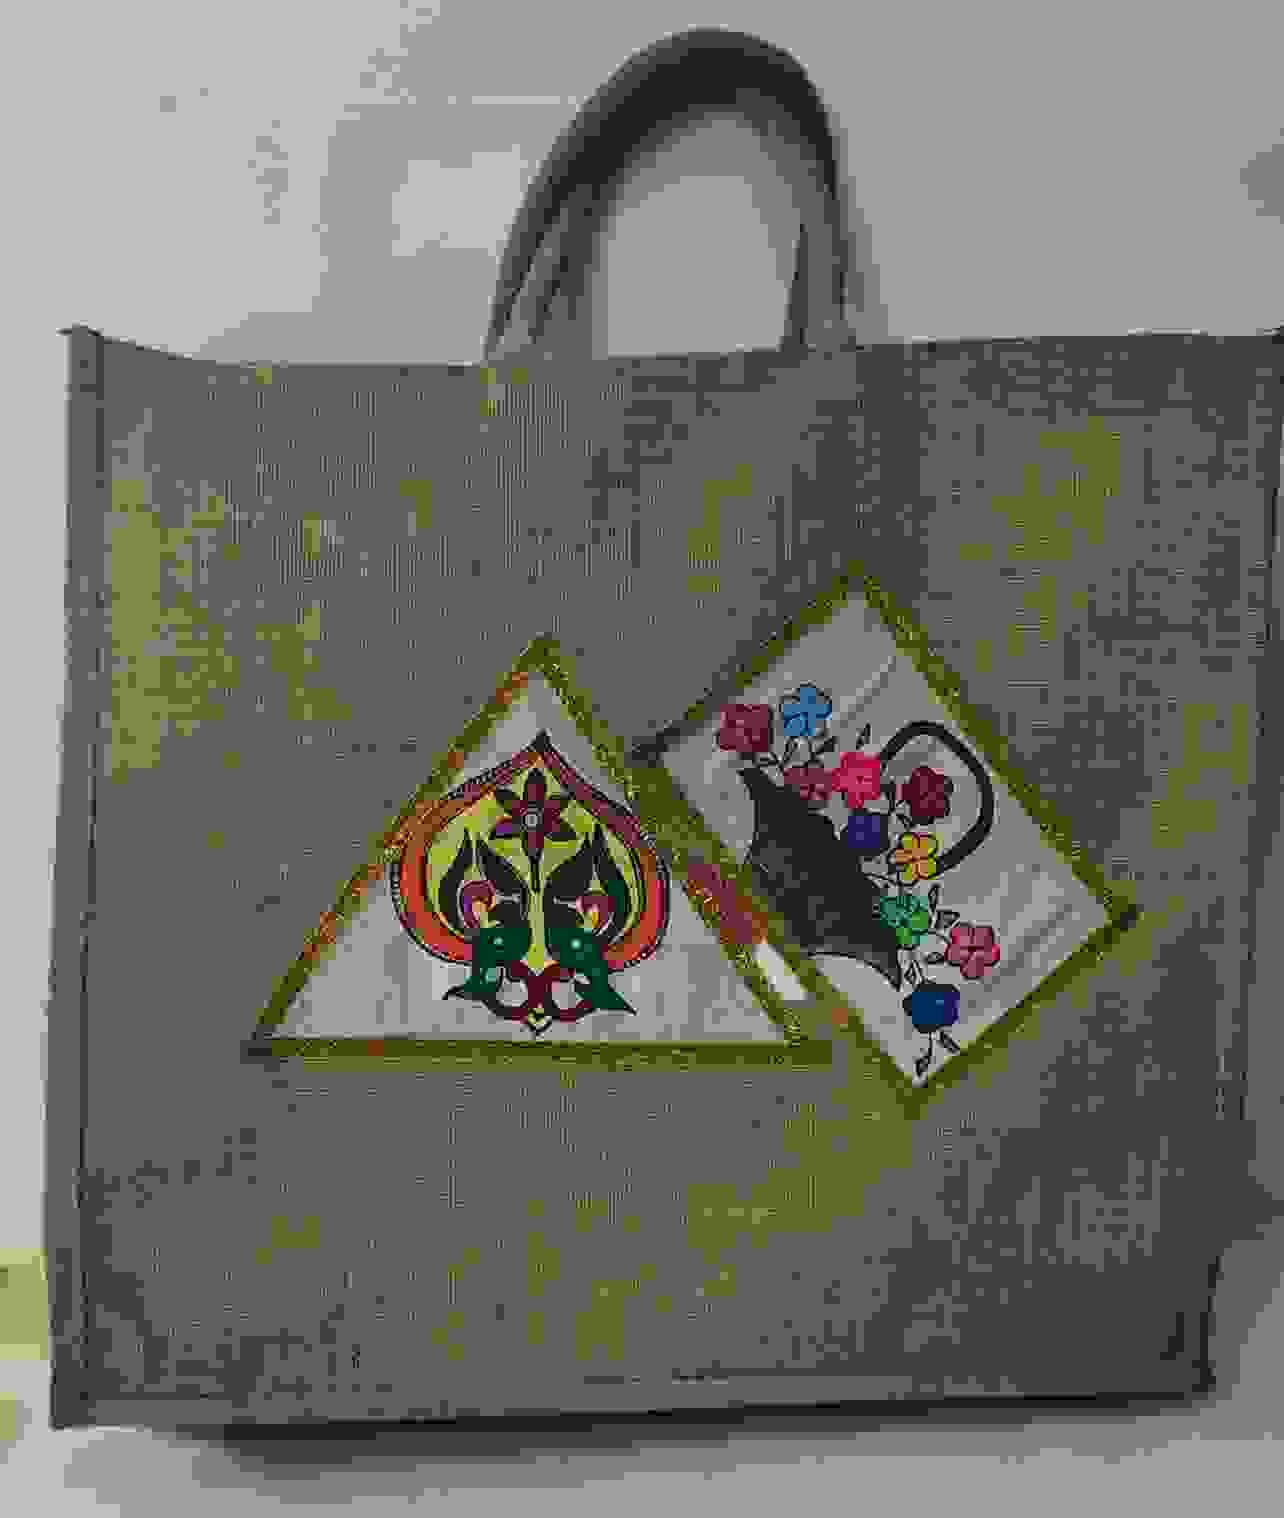 Applique Work On Jute Bag Using Fevicryl Fabric Colors Https